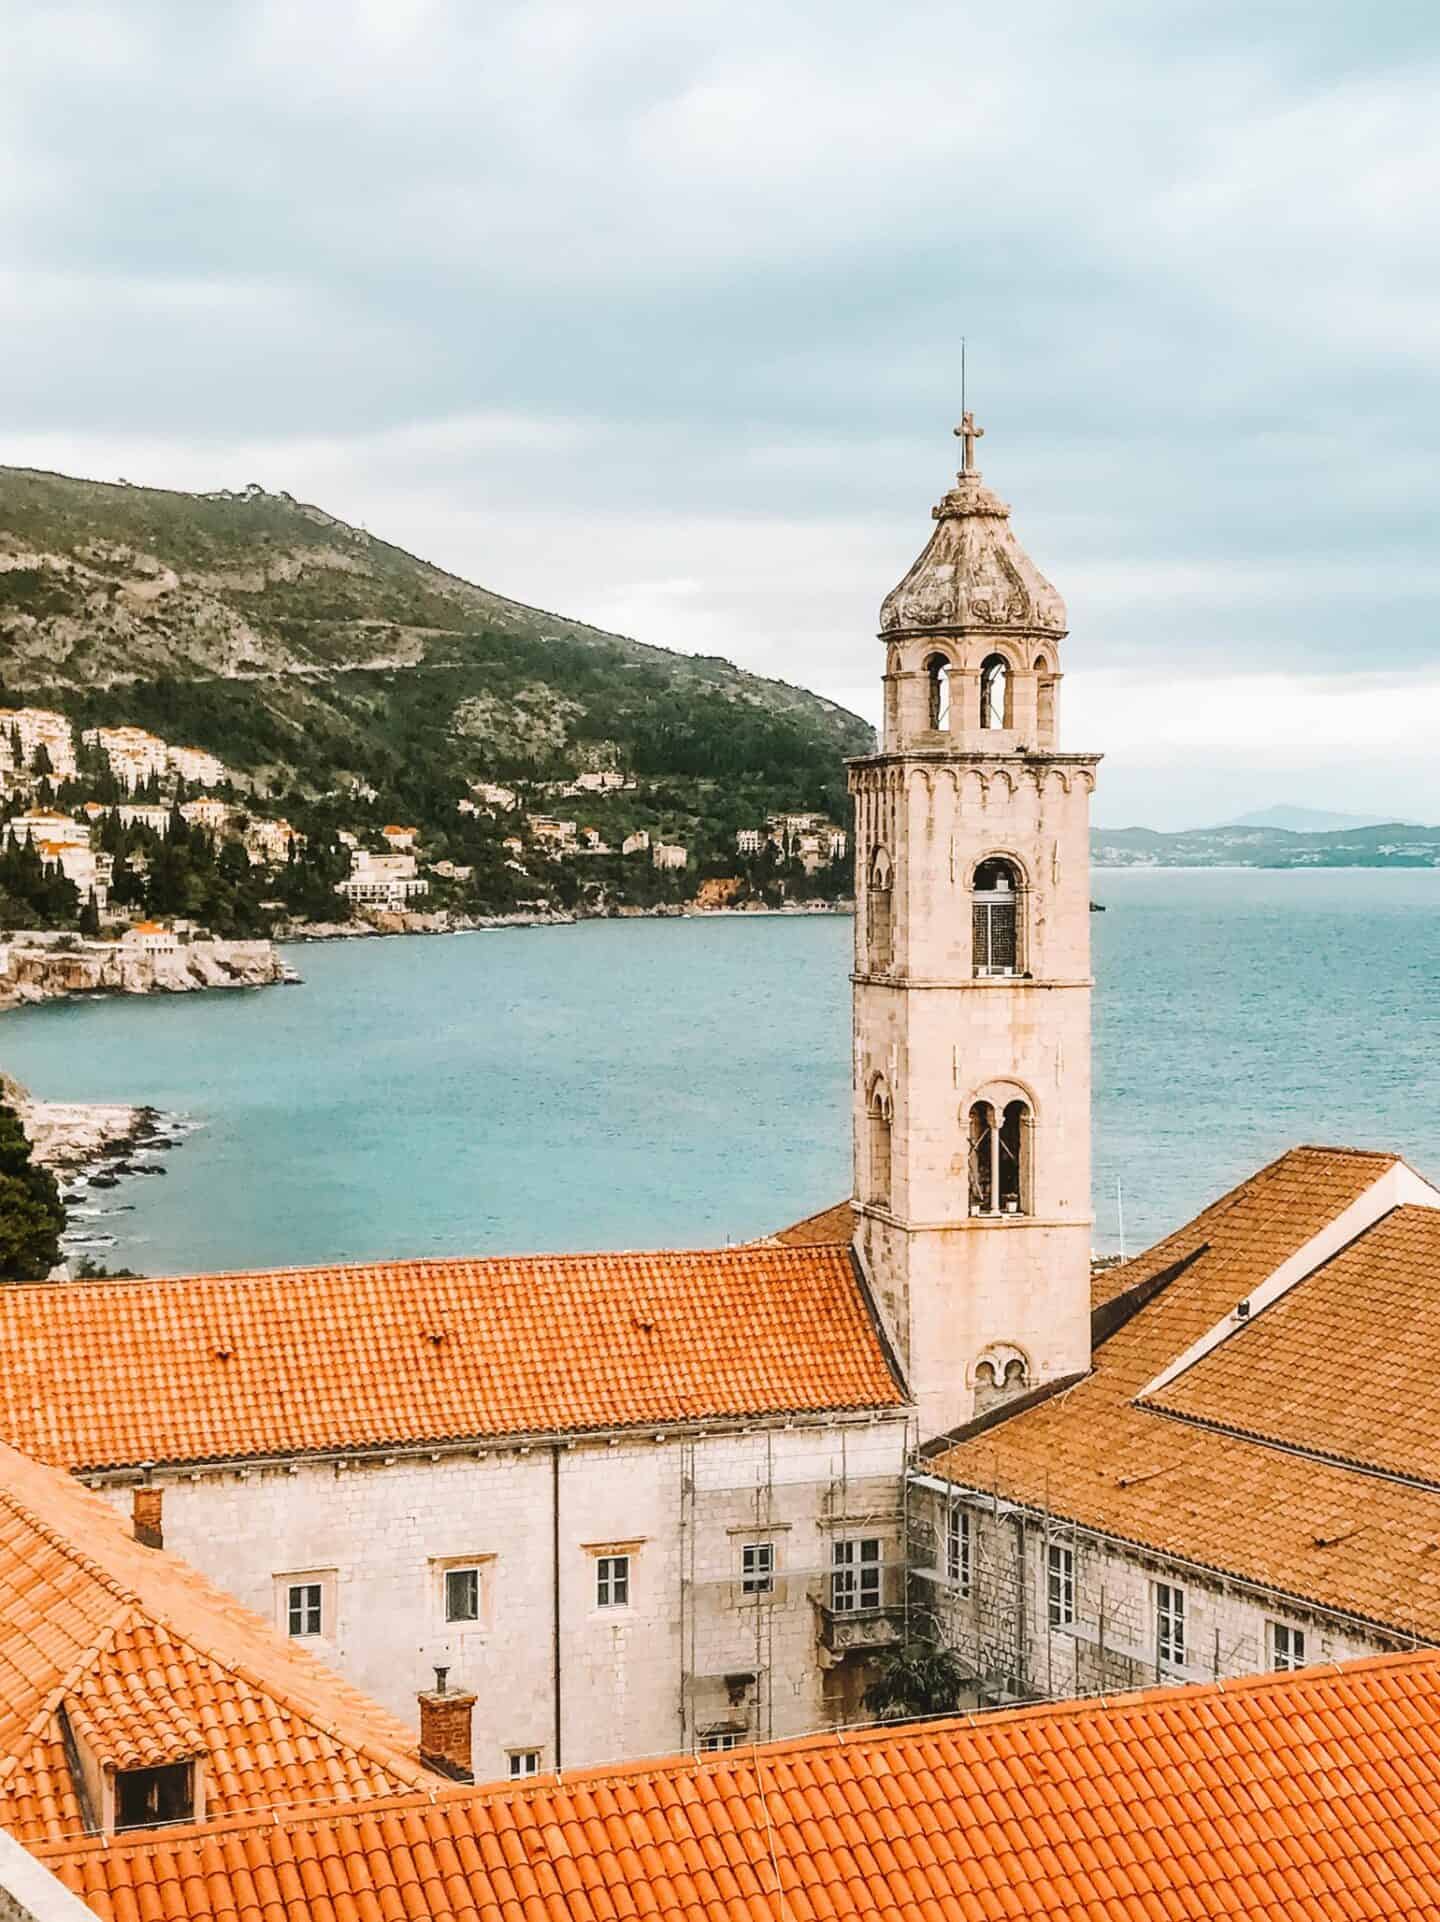 Views from Dubrovnik city walls